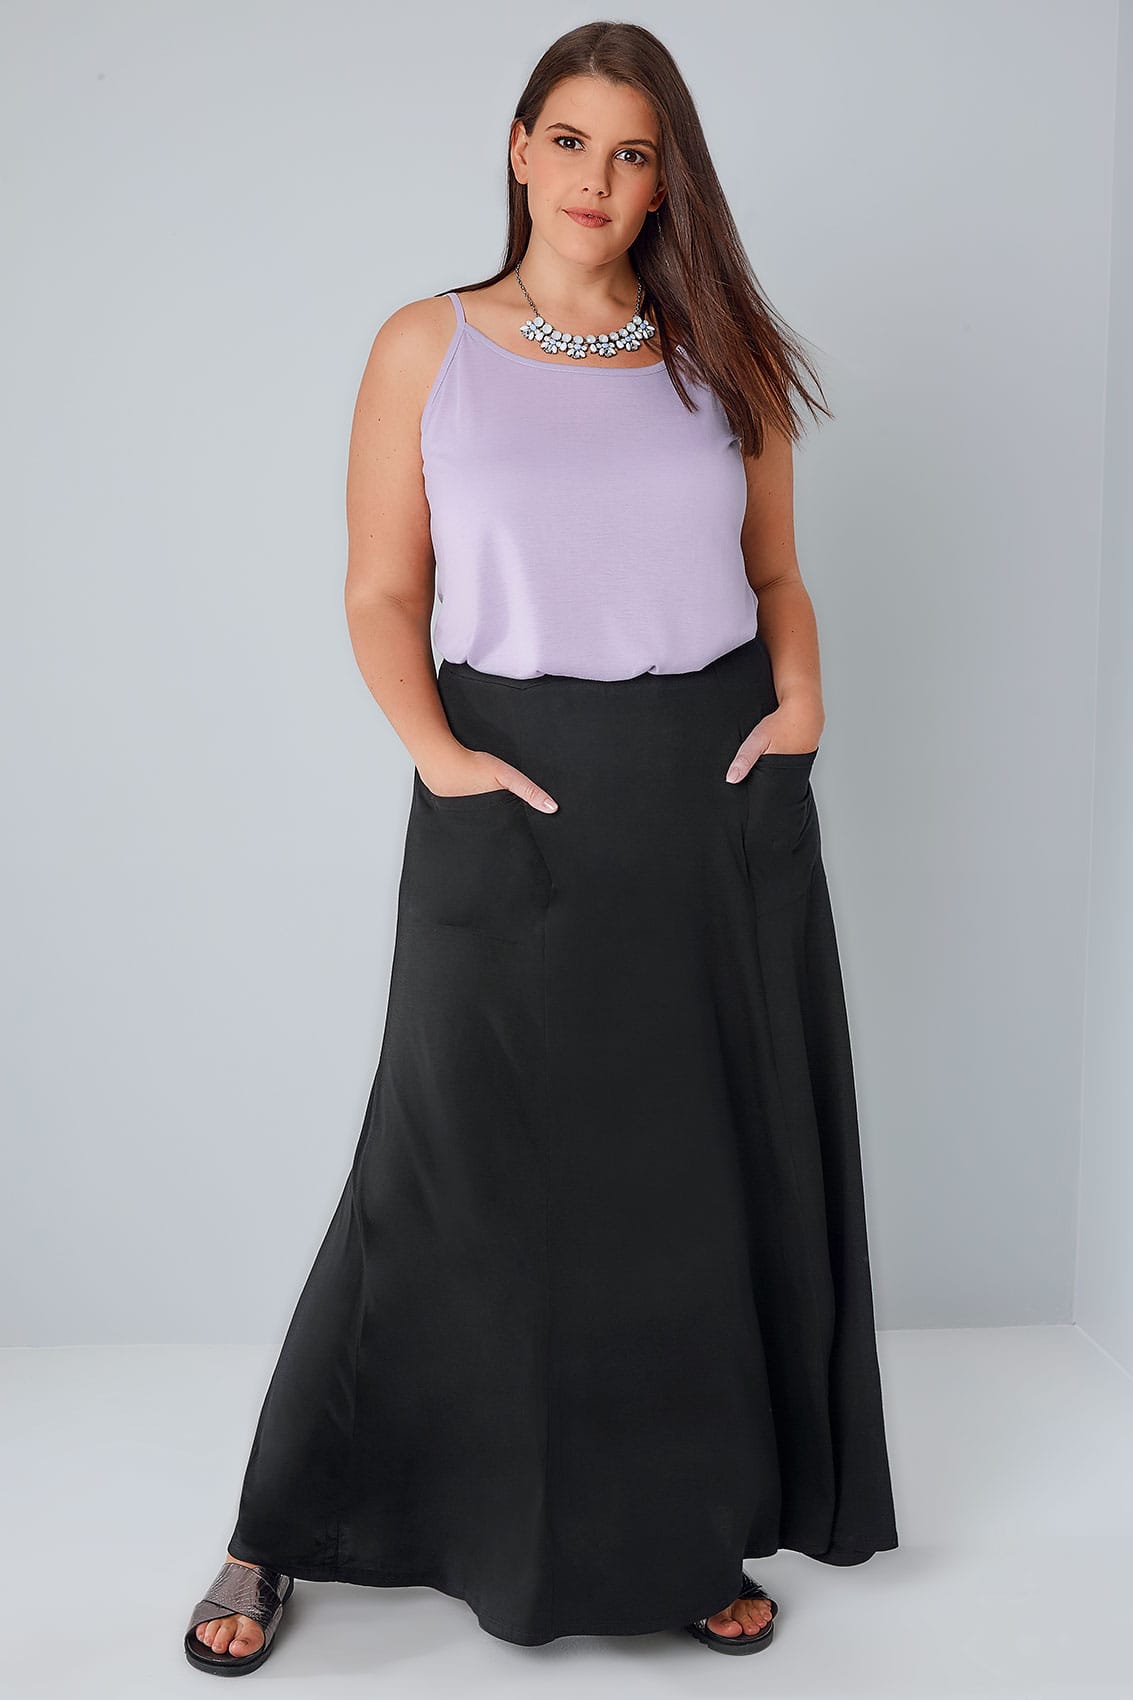 Black Maxi Skirt With Pockets Plus Size 16 To 36 2446